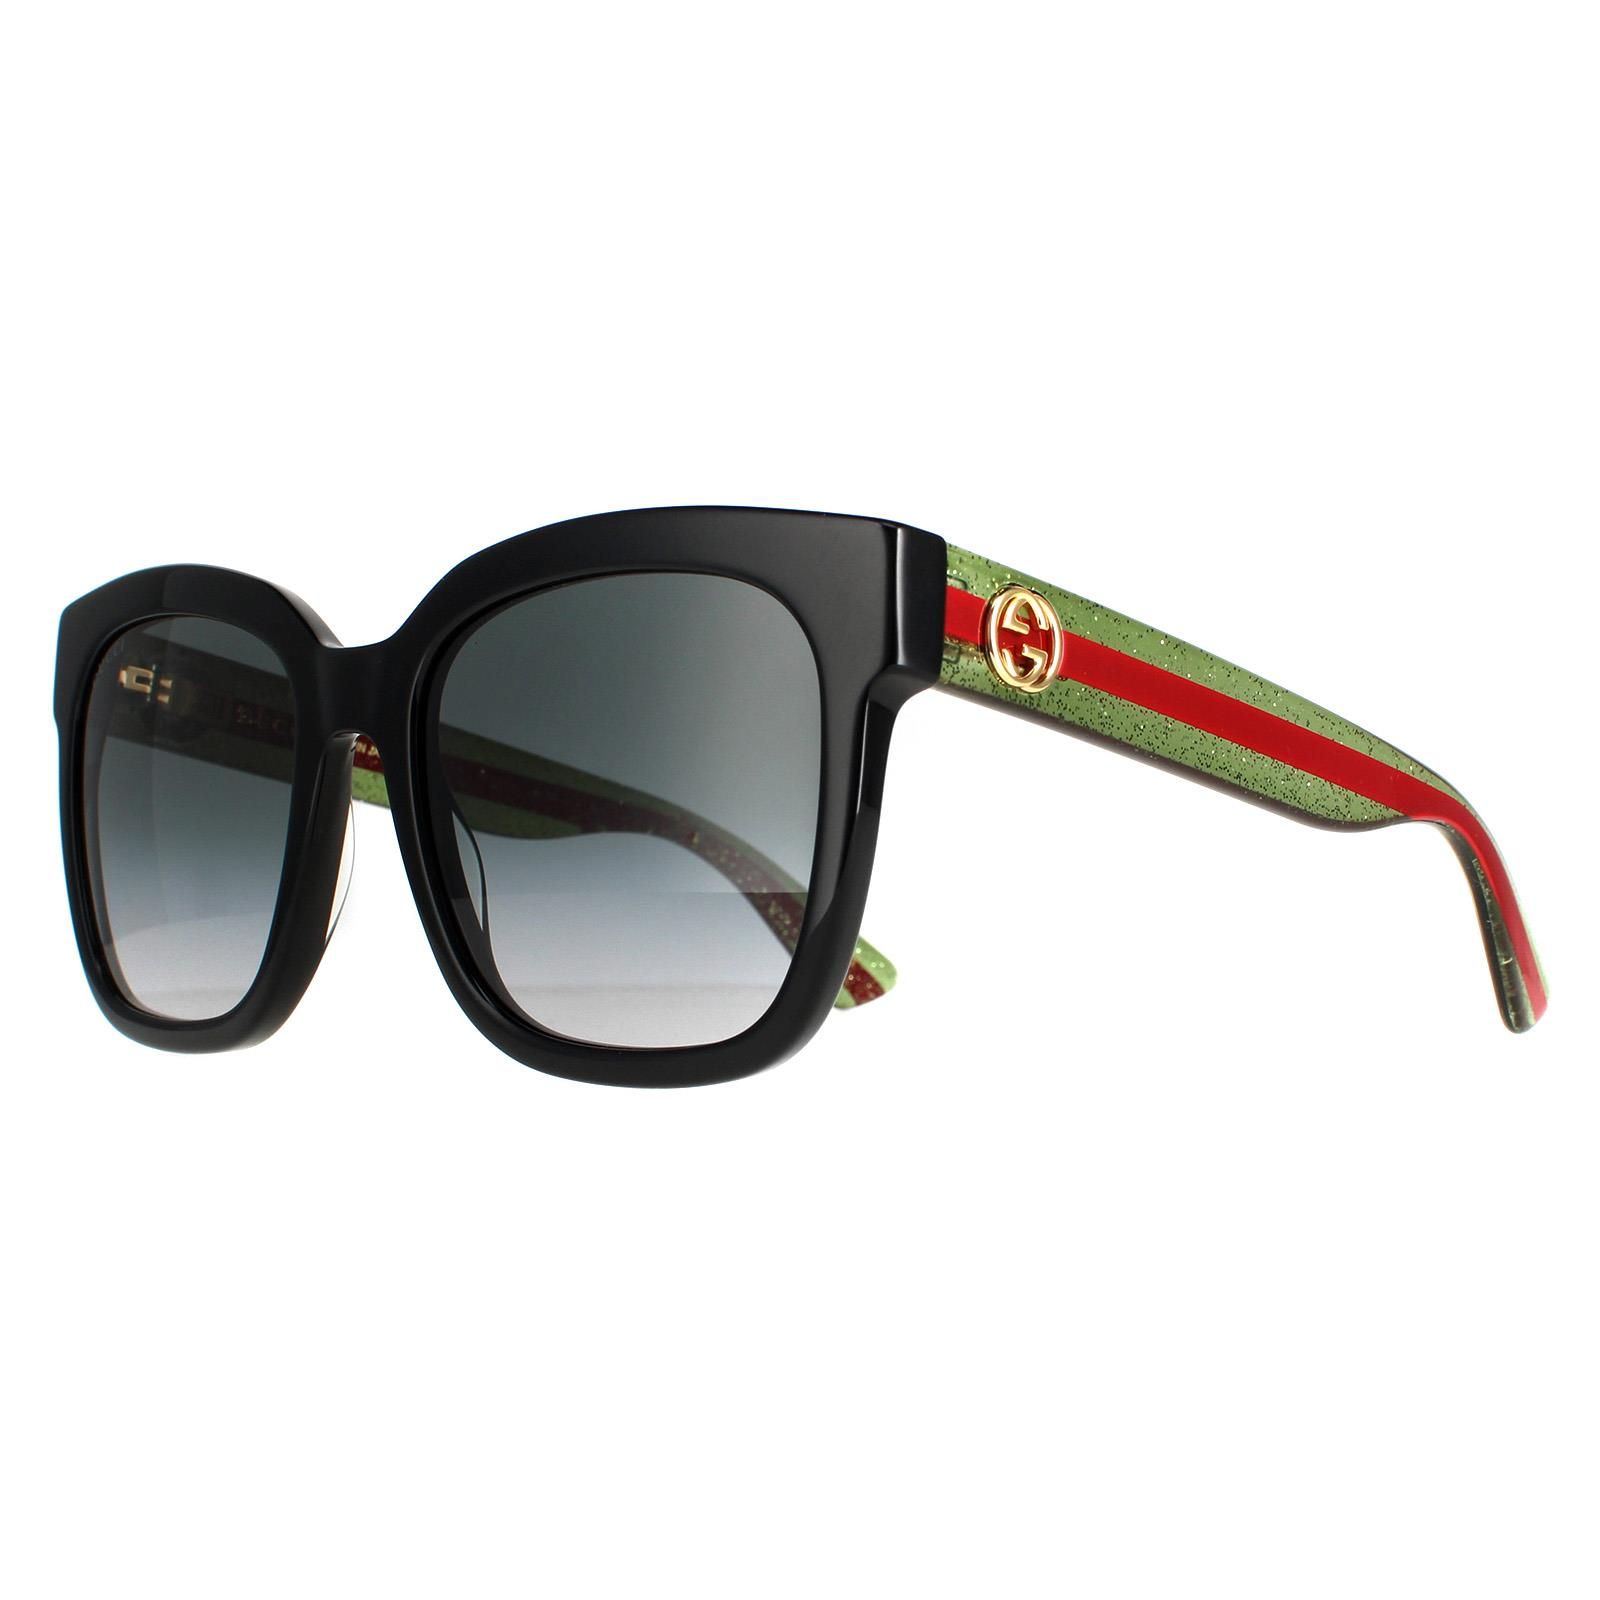 Gucci Square Womens Black With Green and Red Glitter Grey Gradient GG0034SN Sunglasses are a glamorous and oversized square shape frame. The thick acetate frame is lightweight and comfortable with Gucci's iconic GG metal logo at each of the temples. An exquisite style that will always stay on trend!